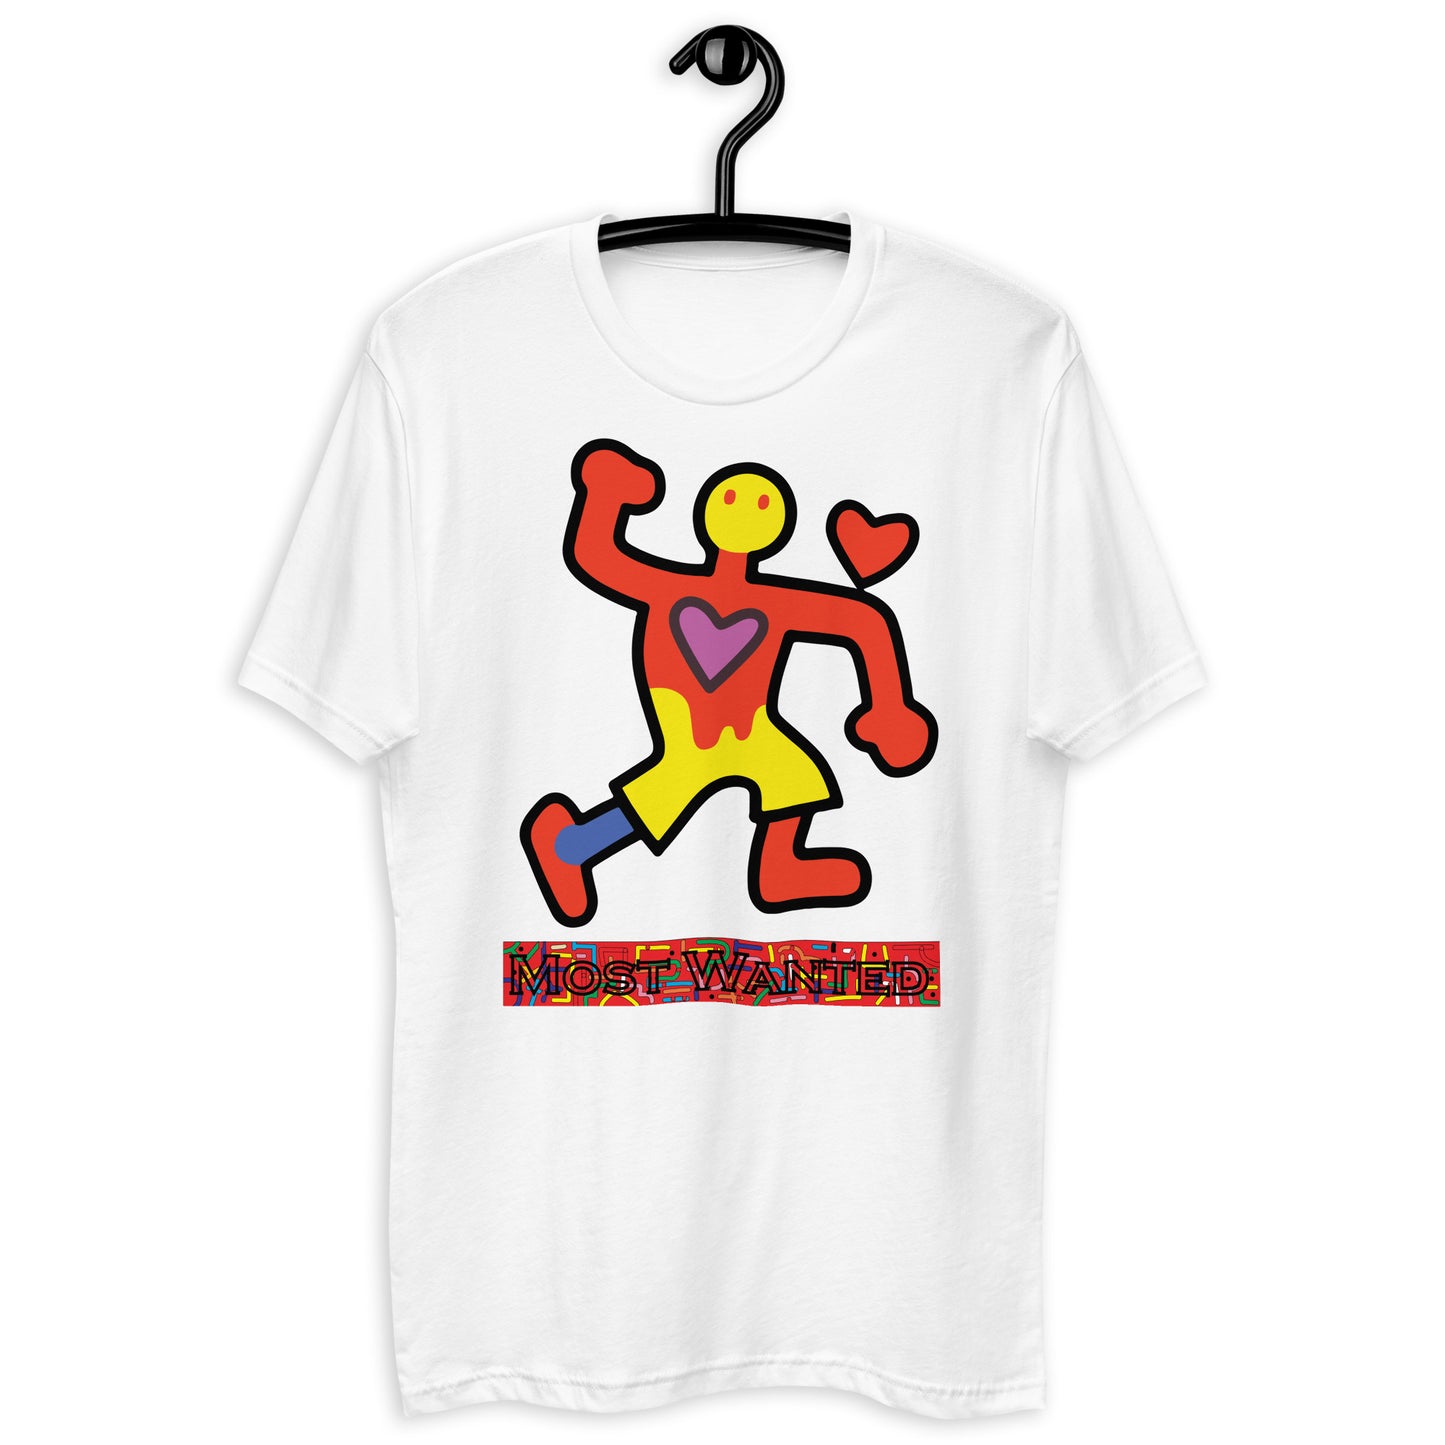 Doodles Me "Most Wanted" T-shirt #7